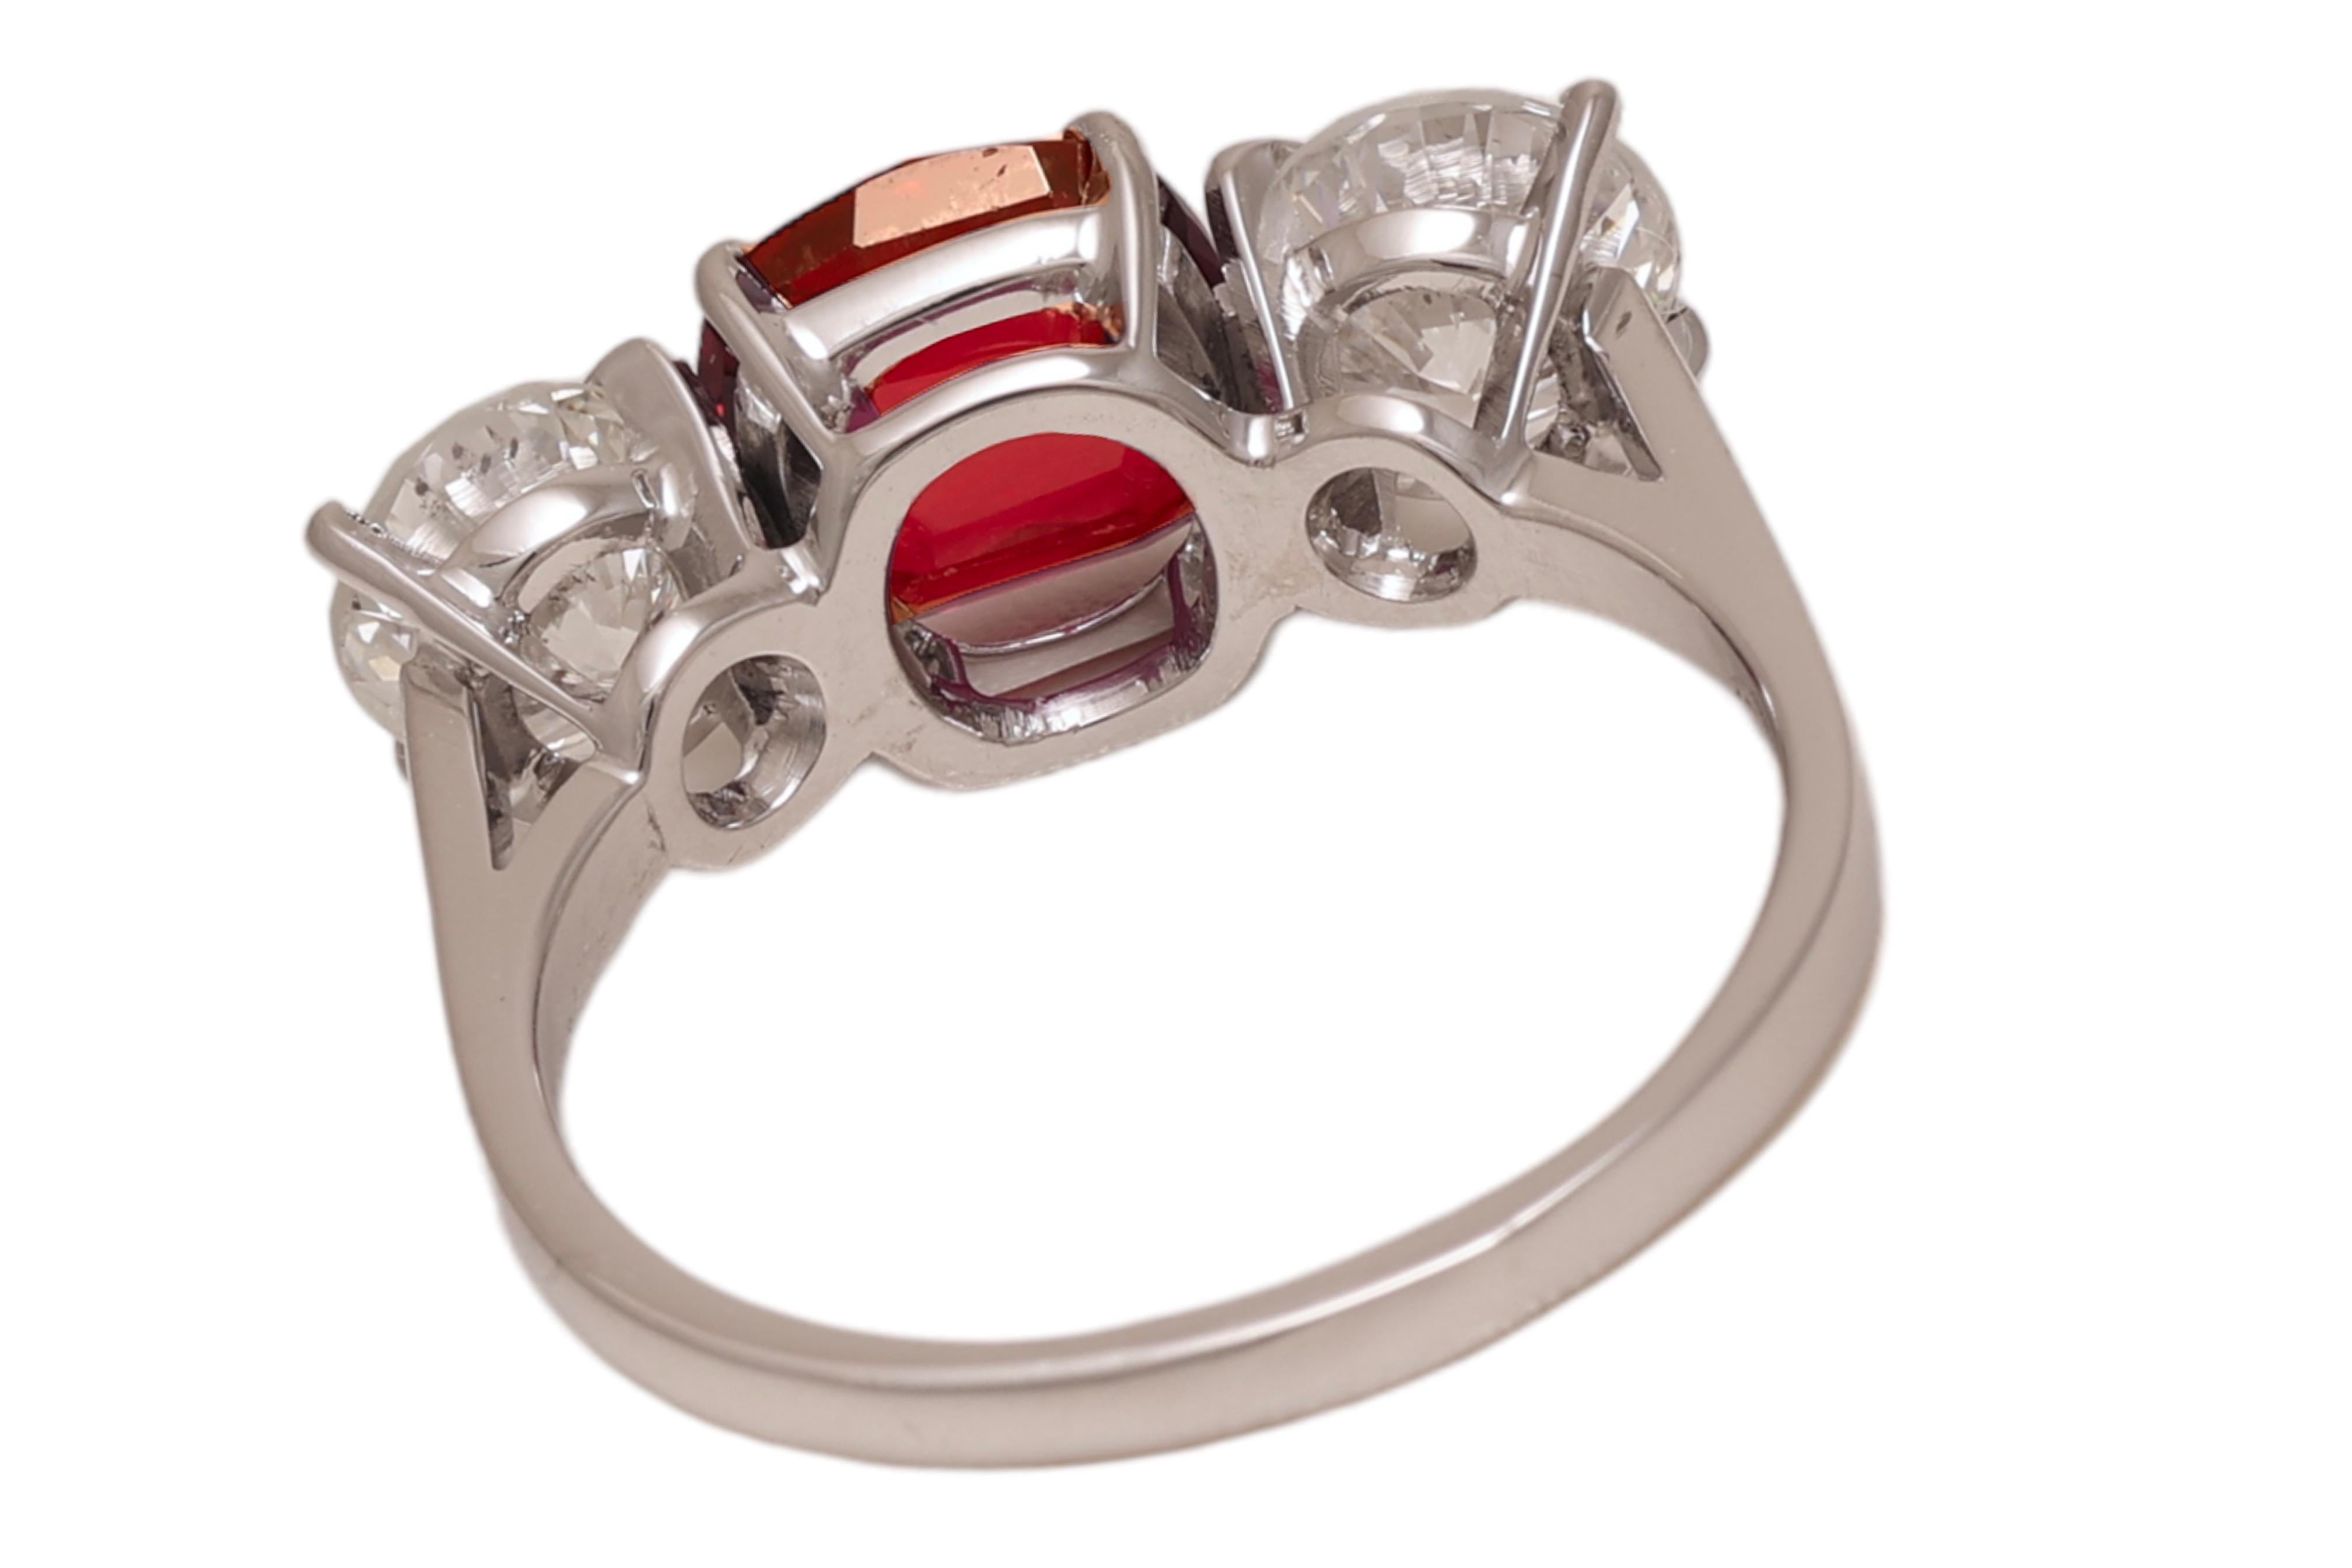 Brilliant Cut 18 kt. White Gold Trilogy Ring  2.2 ct. Vivid Red Siam Ruby & 1.73 ct. Diamonds For Sale